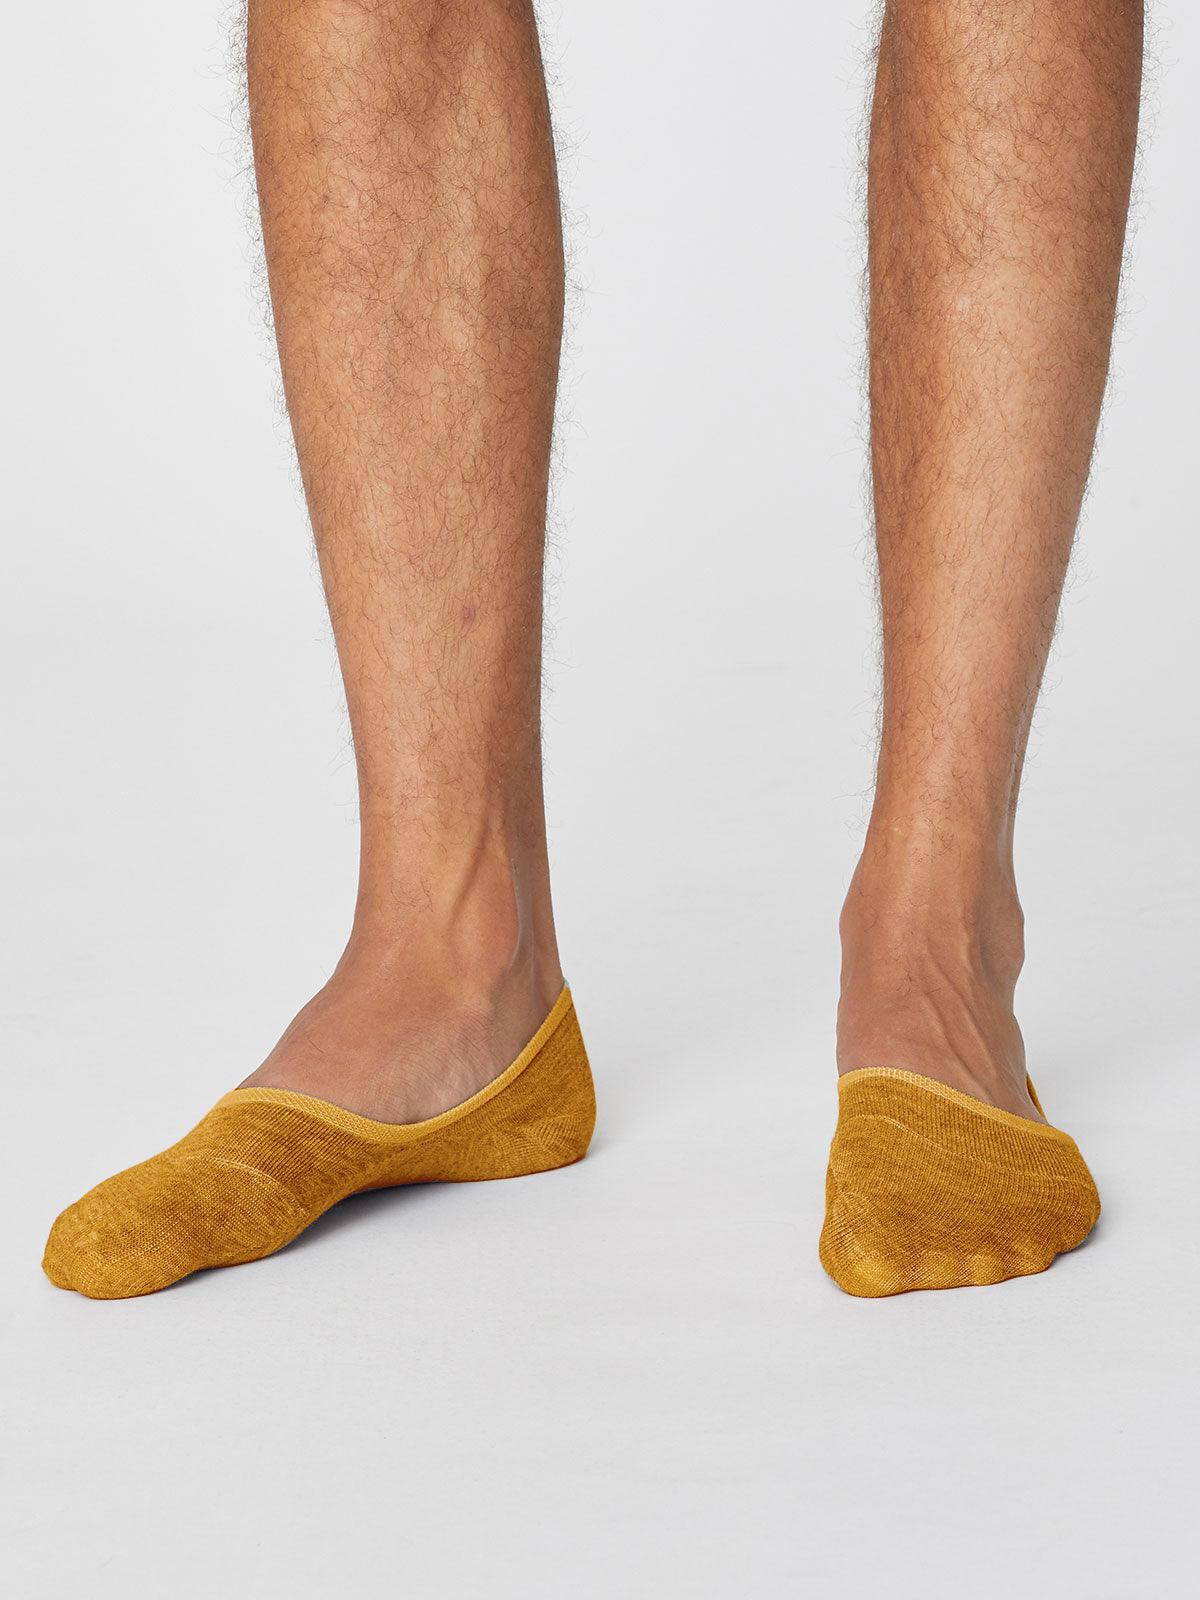 No Show Men's Invisible Socks - Thought Clothing UK